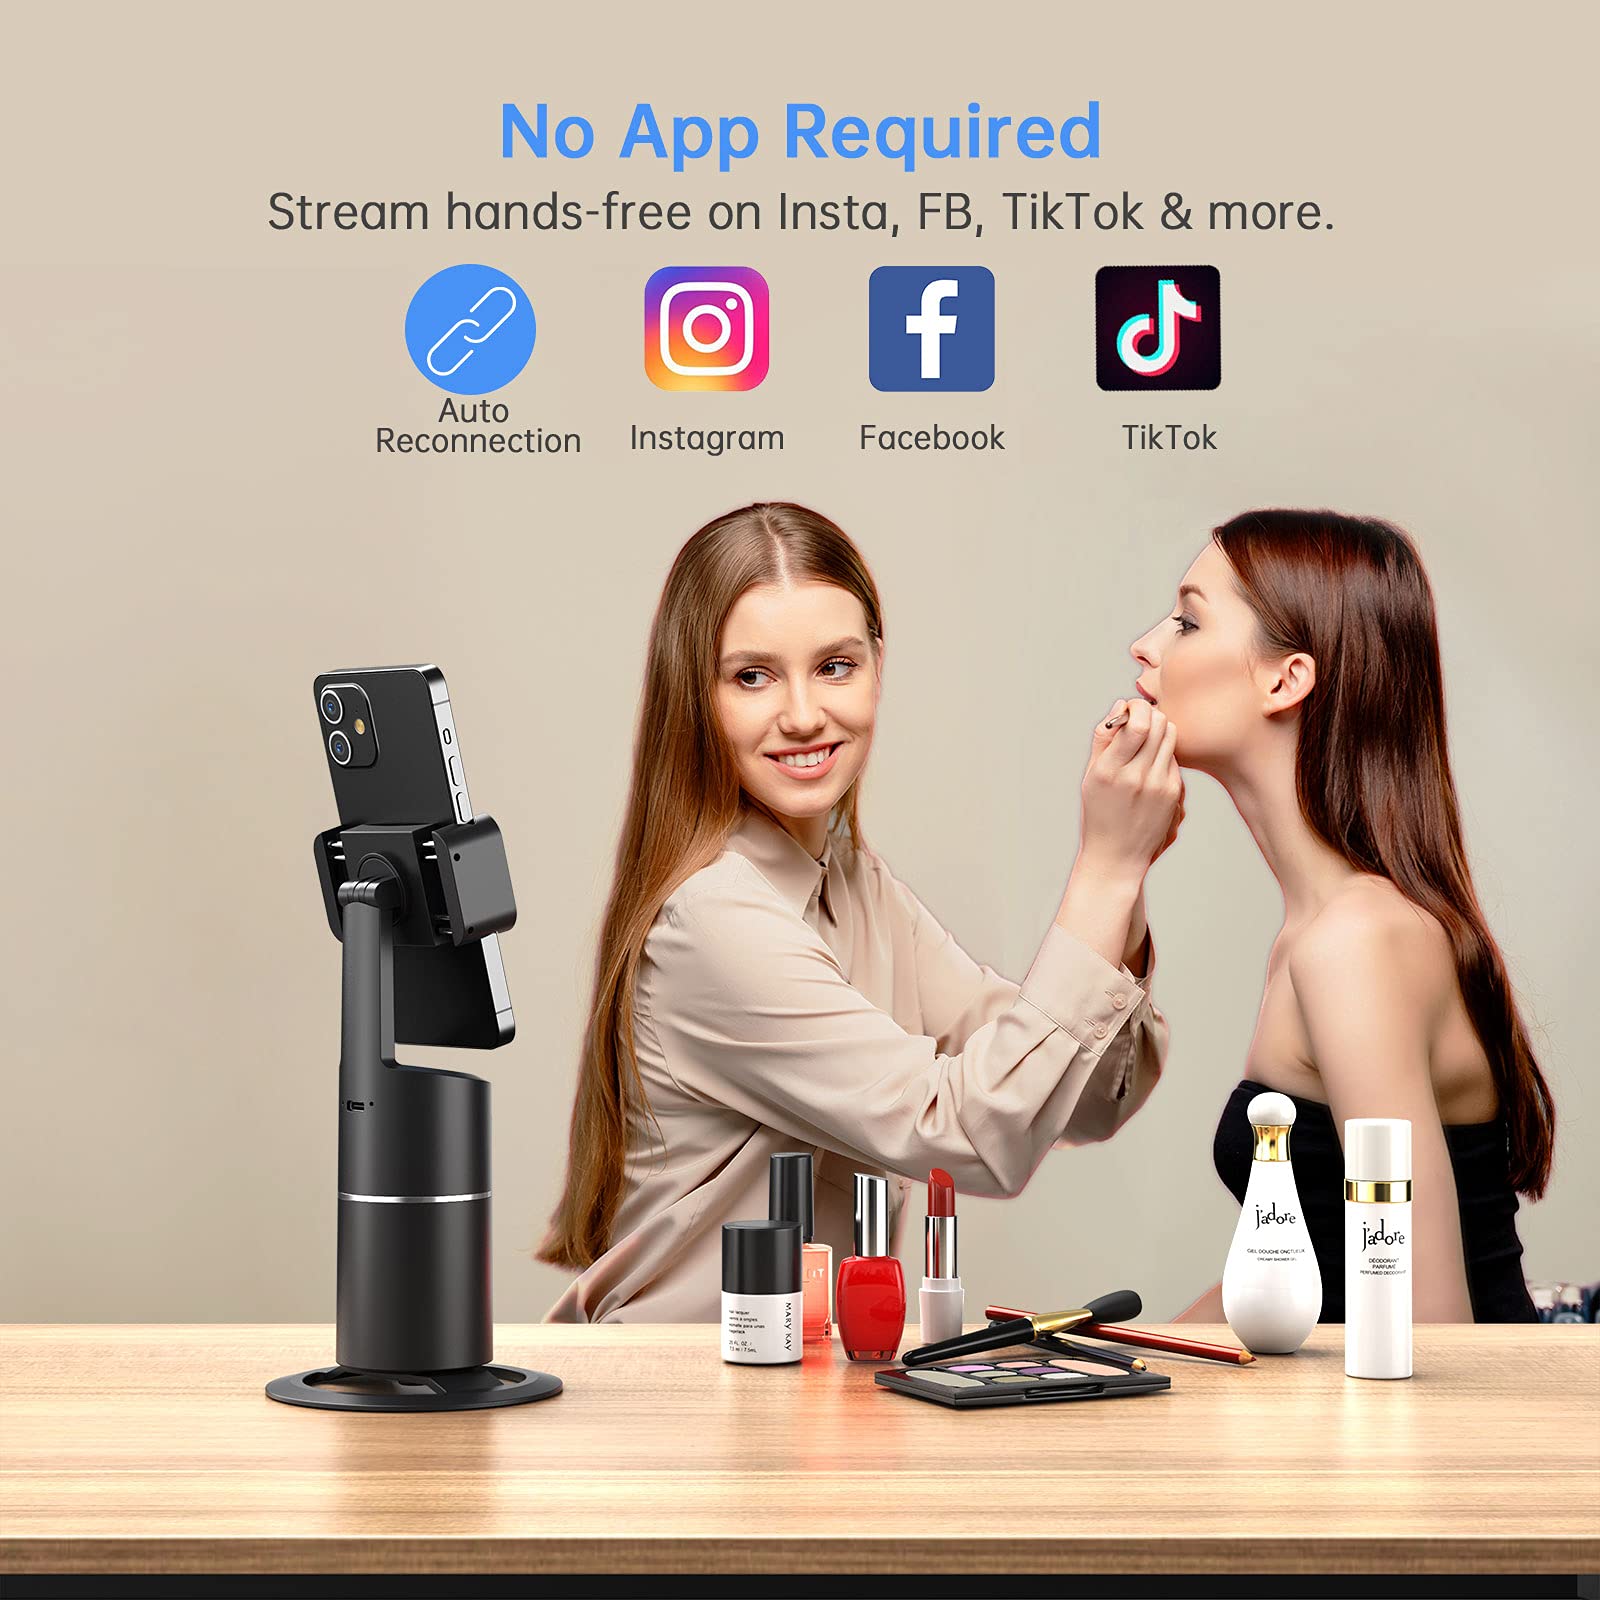 Auto Face Tracking Phone Selfie Stick